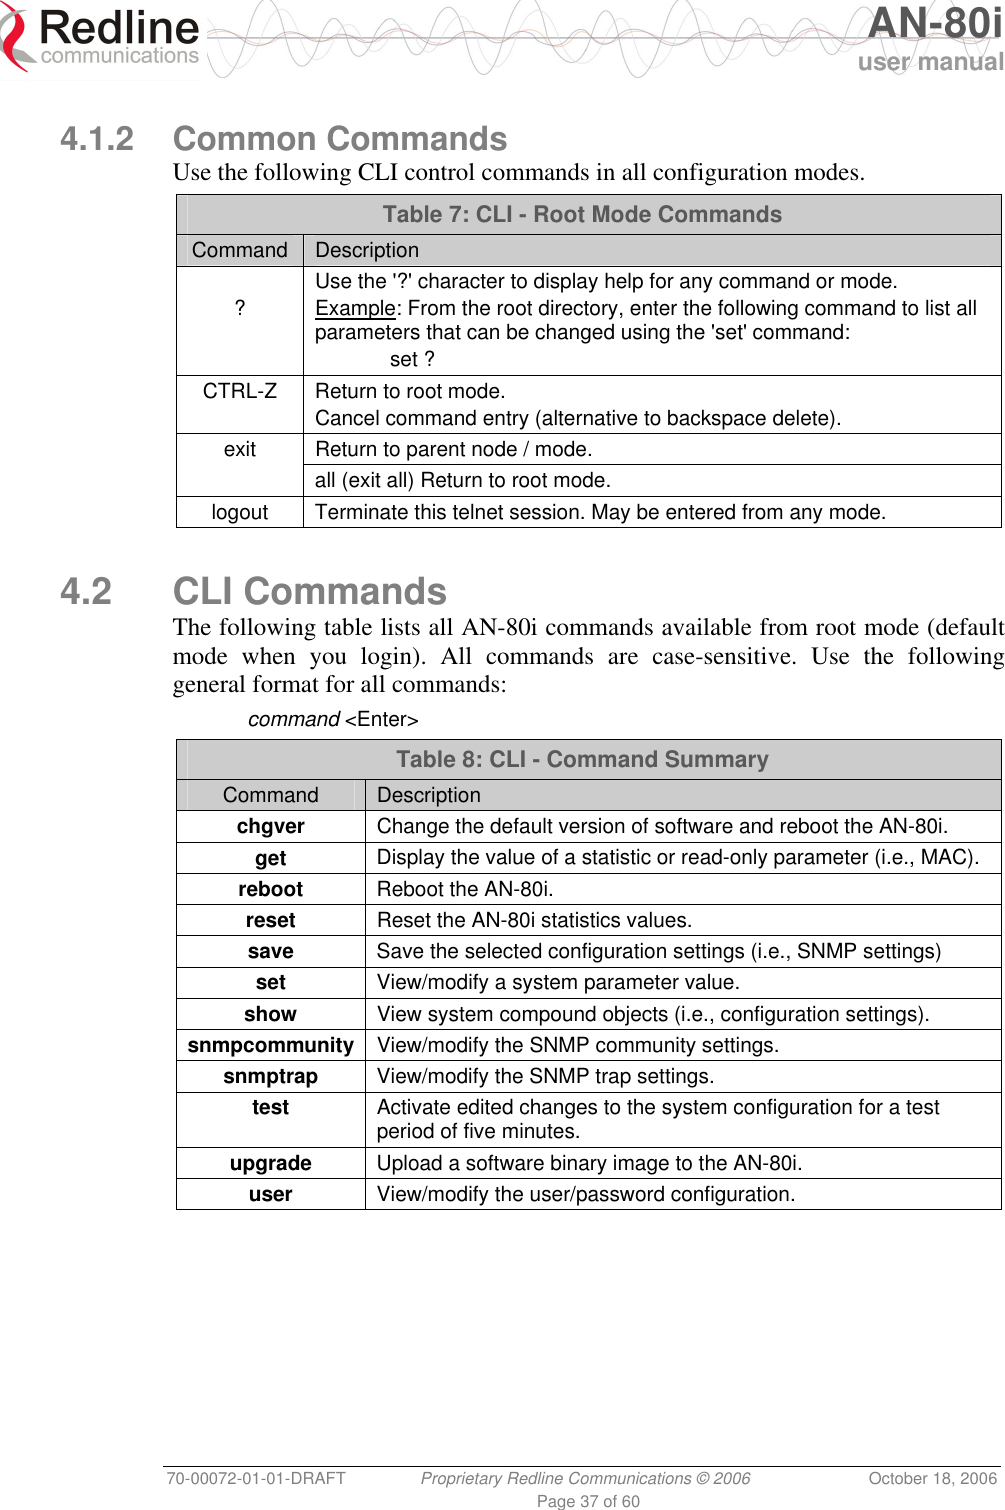   AN-80i user manual 70-00072-01-01-DRAFT  Proprietary Redline Communications © 2006  October 18, 2006 Page 37 of 60  4.1.2 Common Commands Use the following CLI control commands in all configuration modes. Table 7: CLI - Root Mode Commands Command  Description  ? Use the &apos;?&apos; character to display help for any command or mode. Example: From the root directory, enter the following command to list all parameters that can be changed using the &apos;set&apos; command:  set ? CTRL-Z  Return to root mode. Cancel command entry (alternative to backspace delete). Return to parent node / mode. exit  all (exit all) Return to root mode. logout  Terminate this telnet session. May be entered from any mode.  4.2 CLI Commands The following table lists all AN-80i commands available from root mode (default mode when you login). All commands are case-sensitive. Use the following general format for all commands:  command &lt;Enter&gt; Table 8: CLI - Command Summary Command  Description chgver  Change the default version of software and reboot the AN-80i. get  Display the value of a statistic or read-only parameter (i.e., MAC).  reboot  Reboot the AN-80i. reset  Reset the AN-80i statistics values. save  Save the selected configuration settings (i.e., SNMP settings) set  View/modify a system parameter value. show  View system compound objects (i.e., configuration settings). snmpcommunity  View/modify the SNMP community settings. snmptrap  View/modify the SNMP trap settings. test  Activate edited changes to the system configuration for a test period of five minutes. upgrade  Upload a software binary image to the AN-80i. user  View/modify the user/password configuration.  